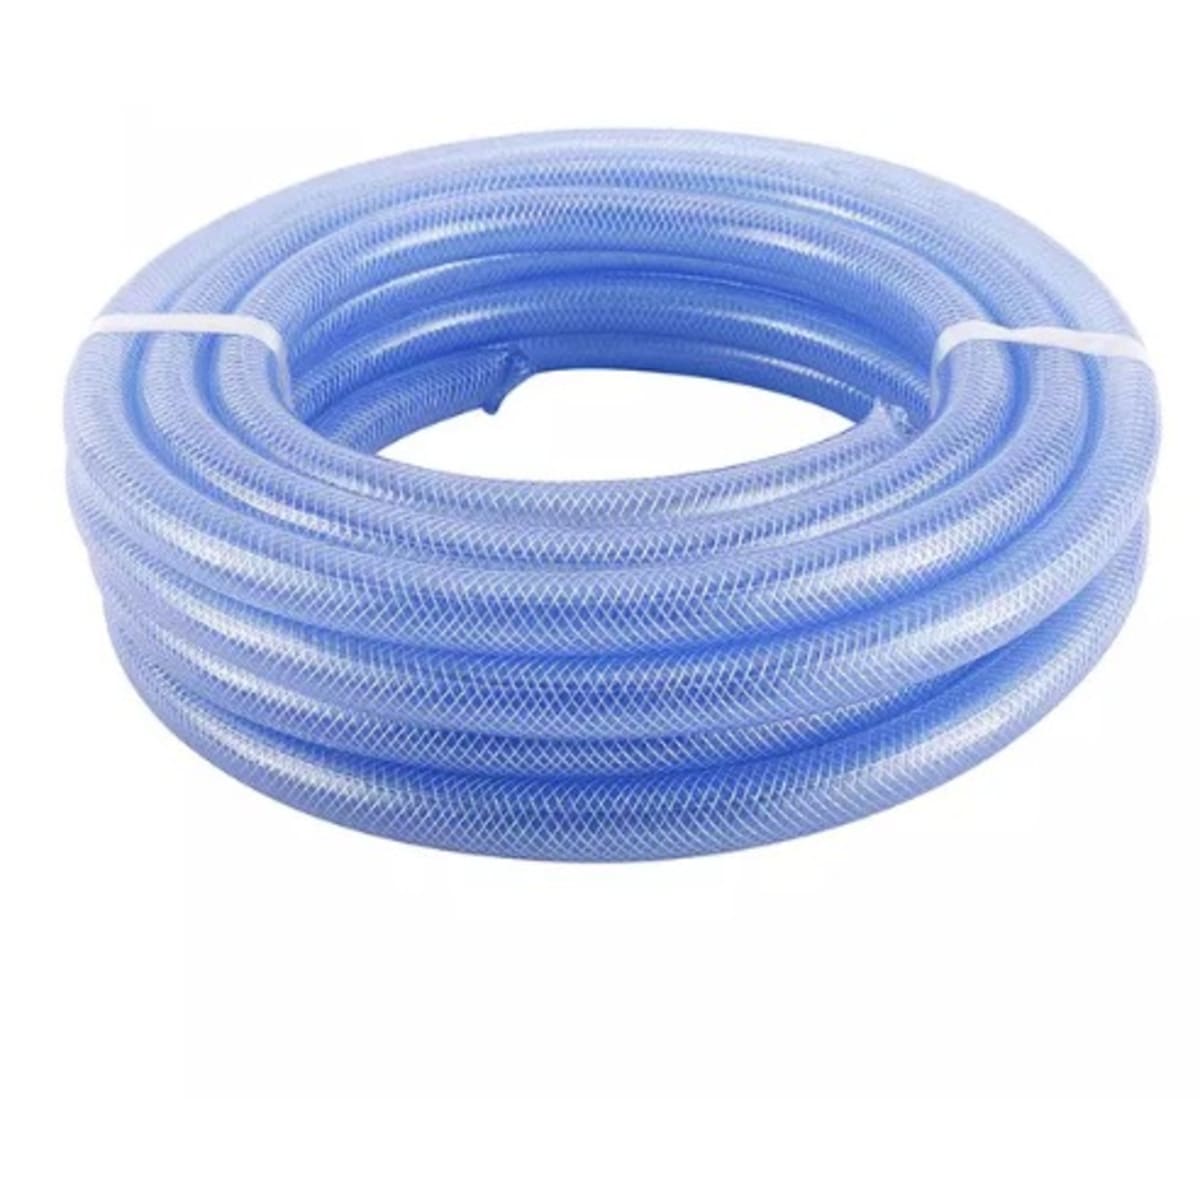 5 MTR Length ( Blue Color) Garden Water Hose Pipe with High